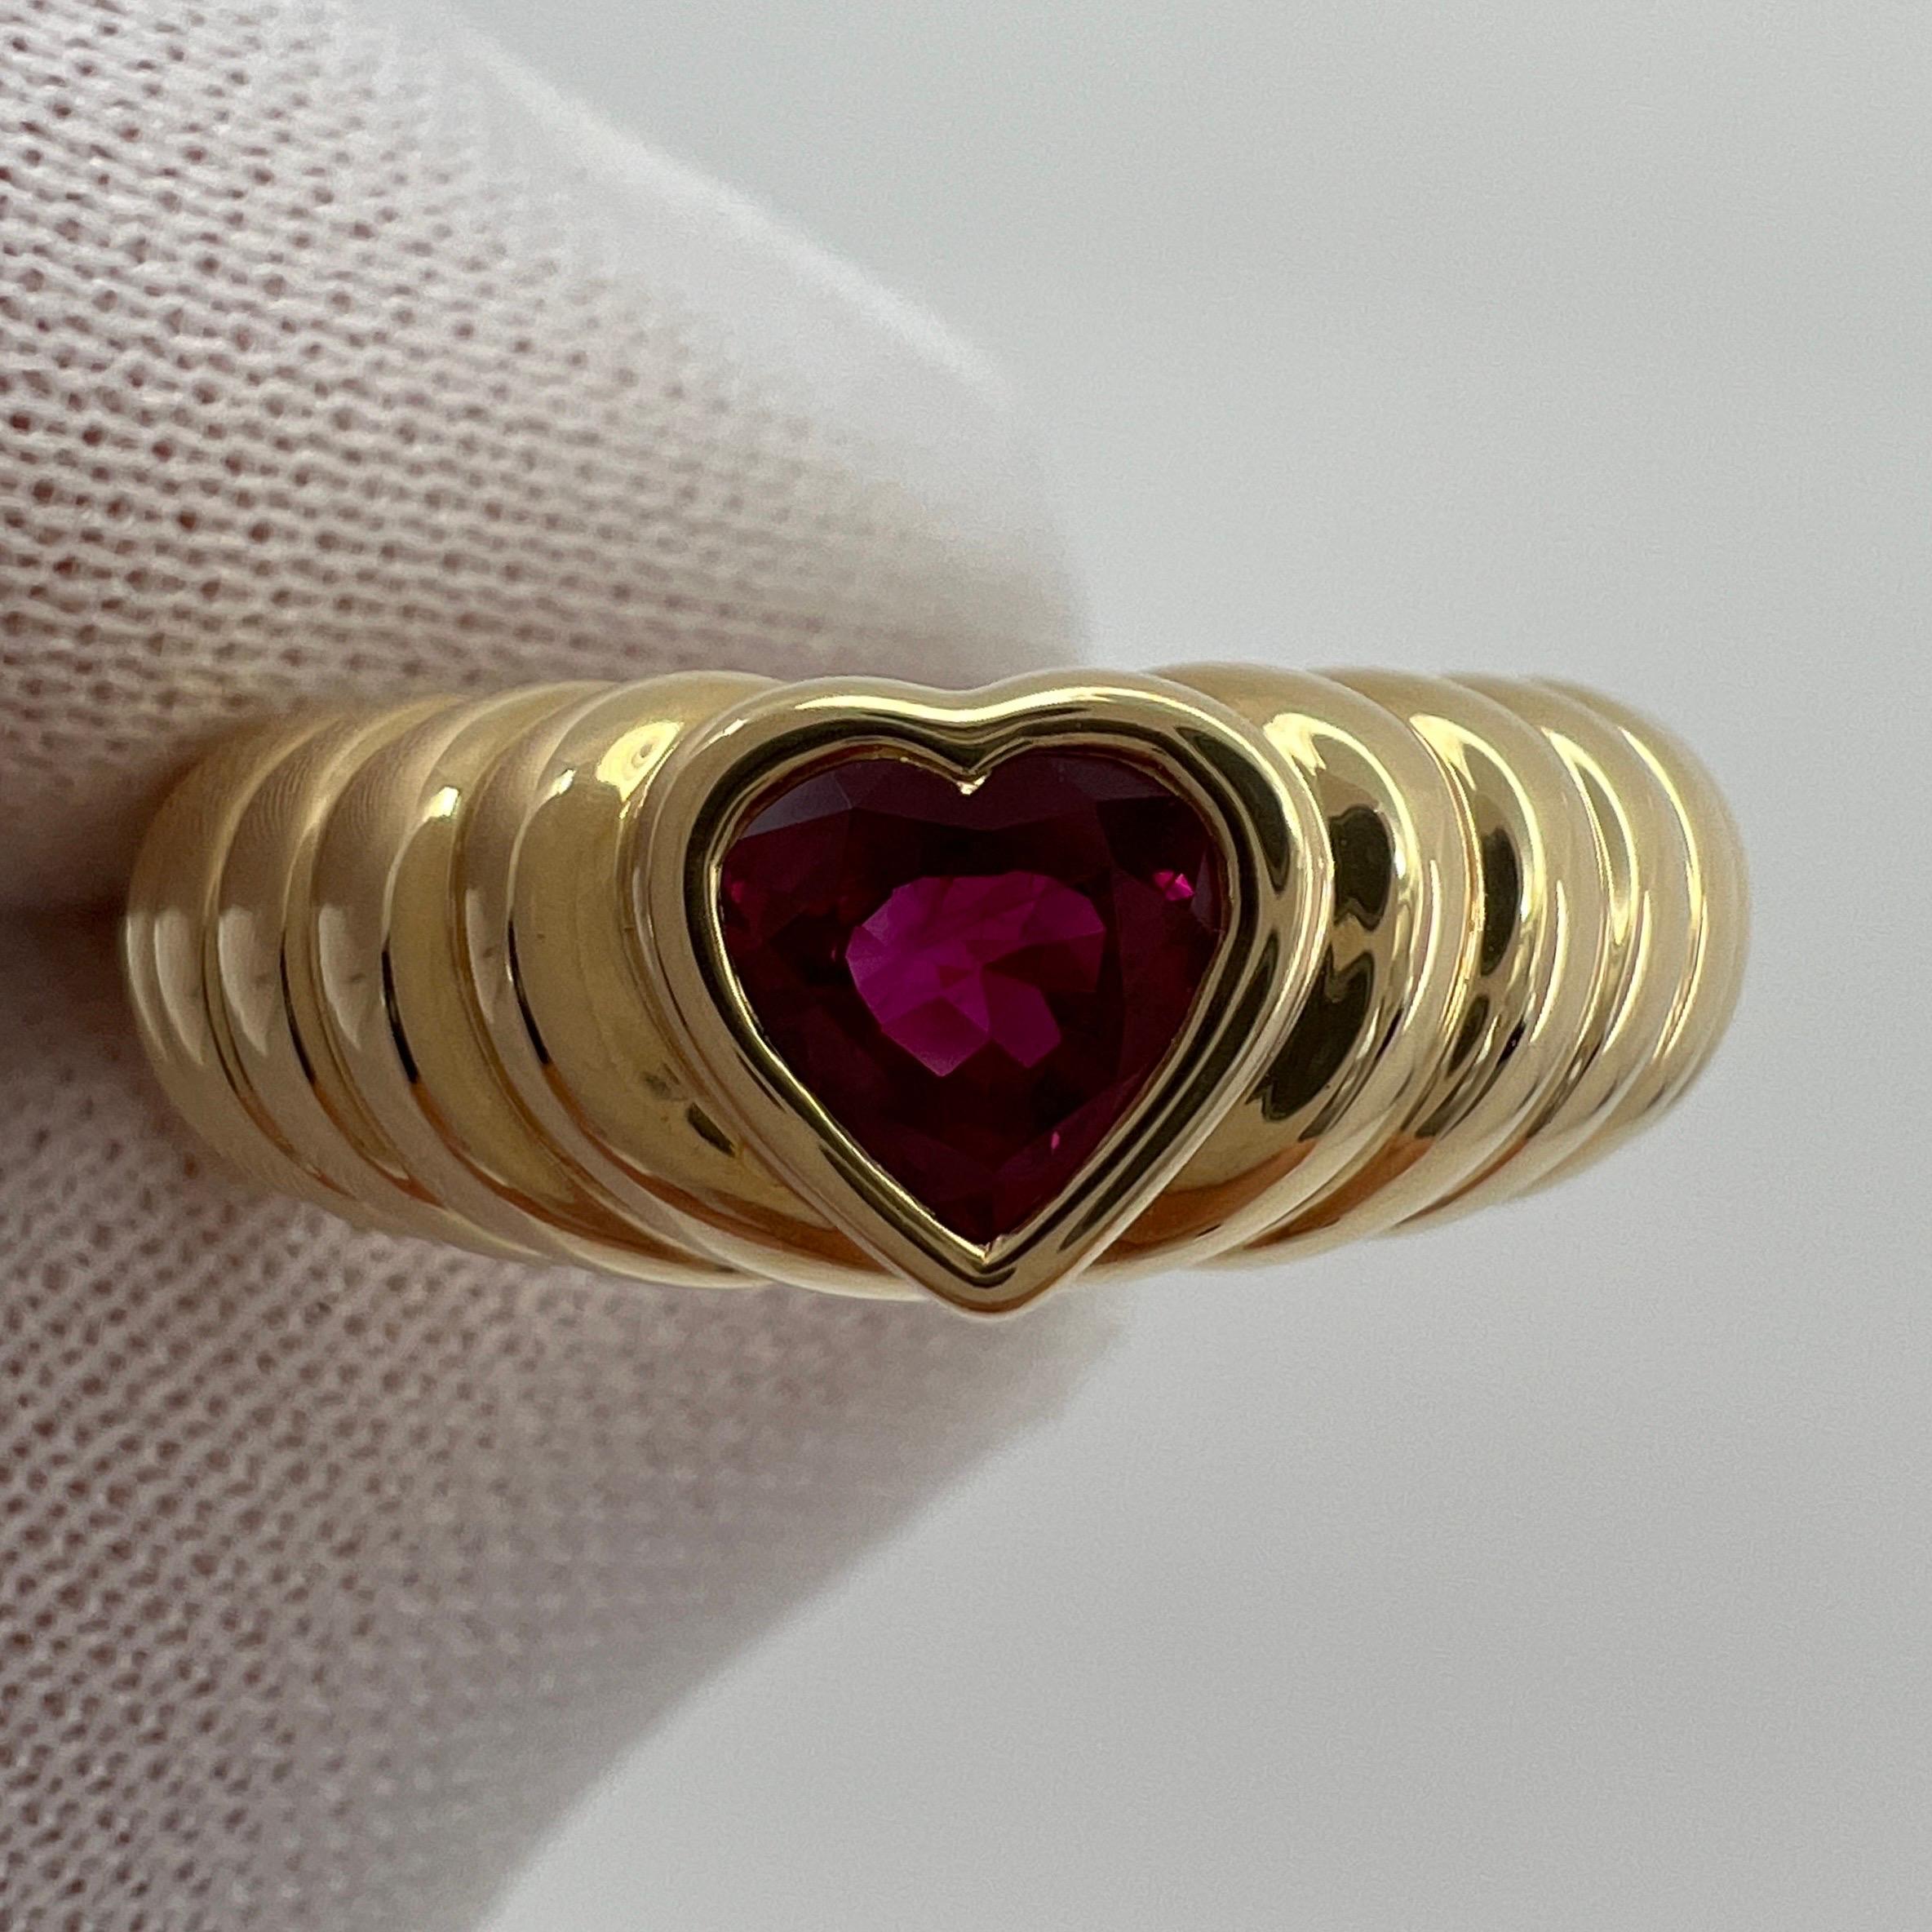 Vintage Tiffany & Co. Vivid Blood Red Ruby Heart Cut 18k Yellow Gold Band Ring 1